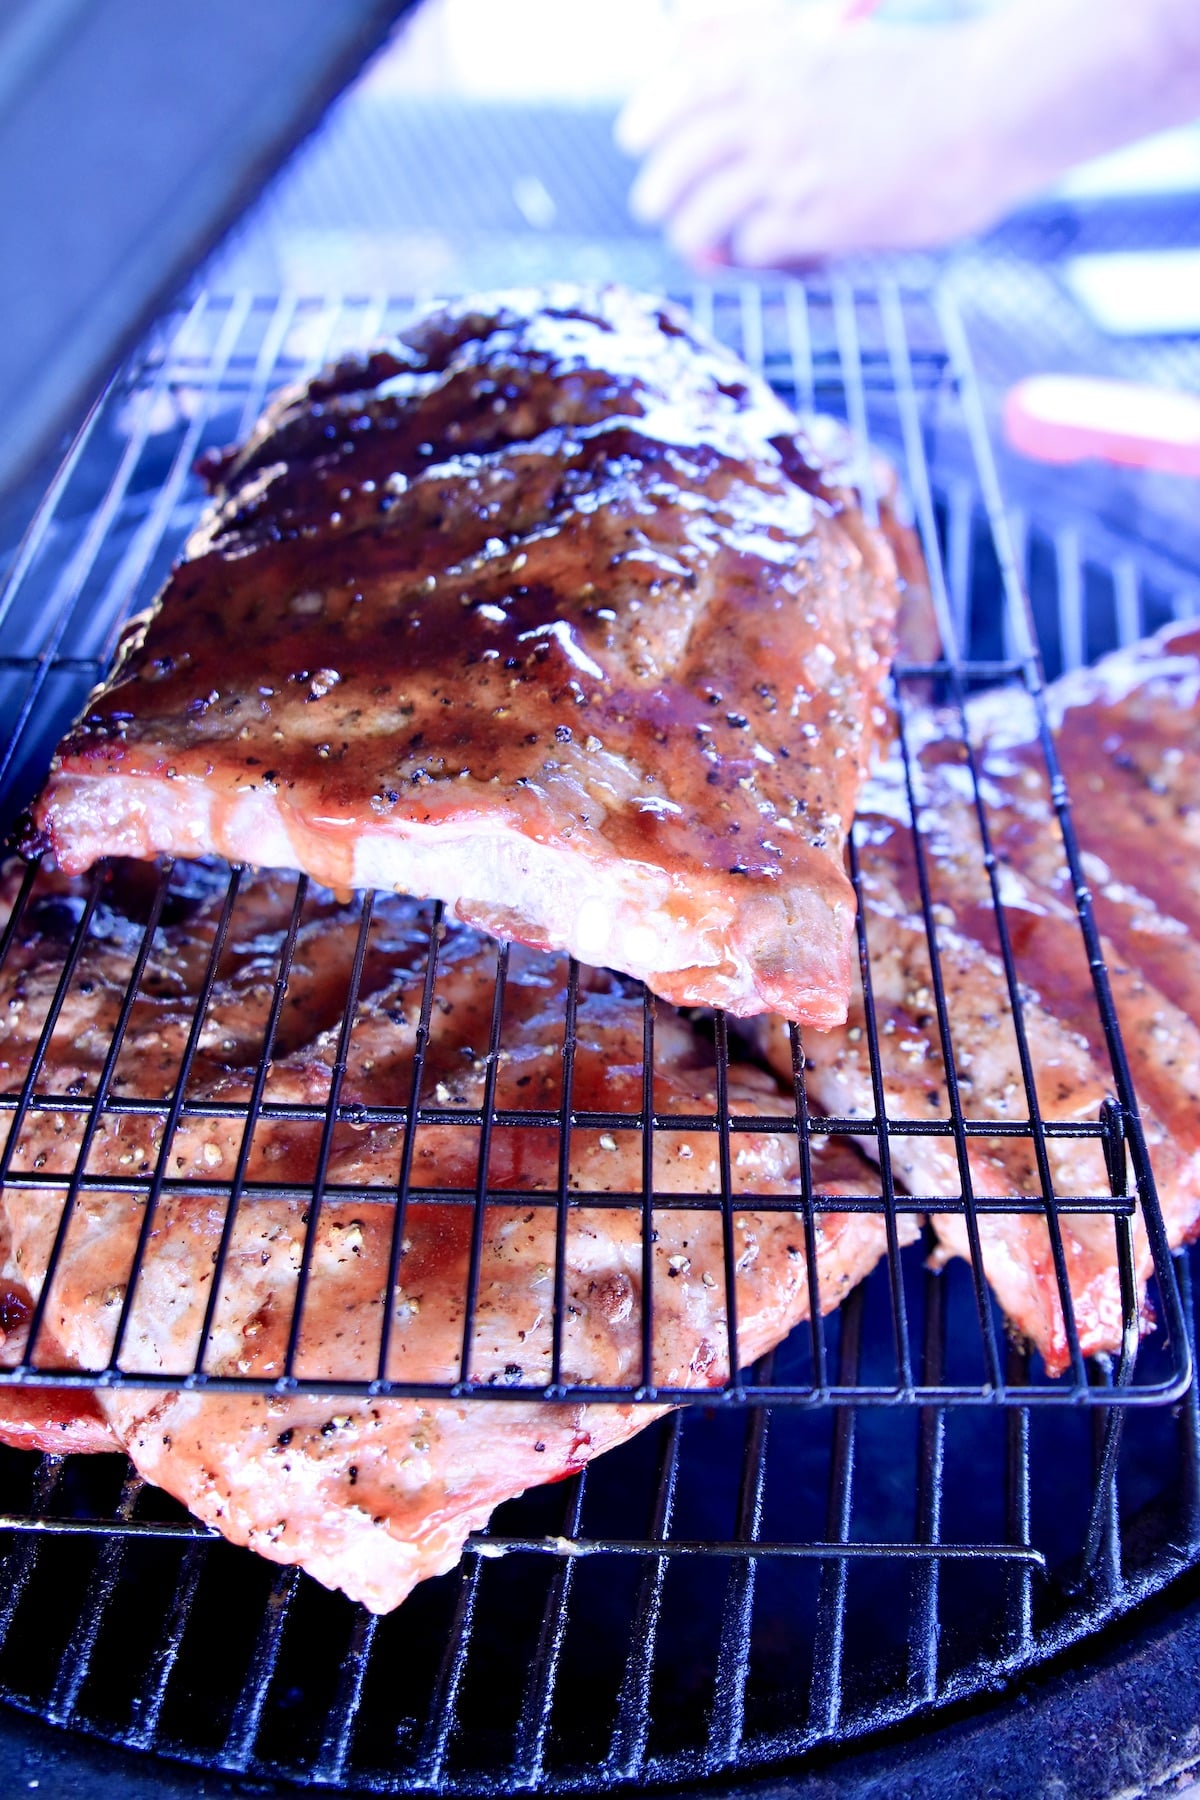 Grilling ½ racks of spare ribs.